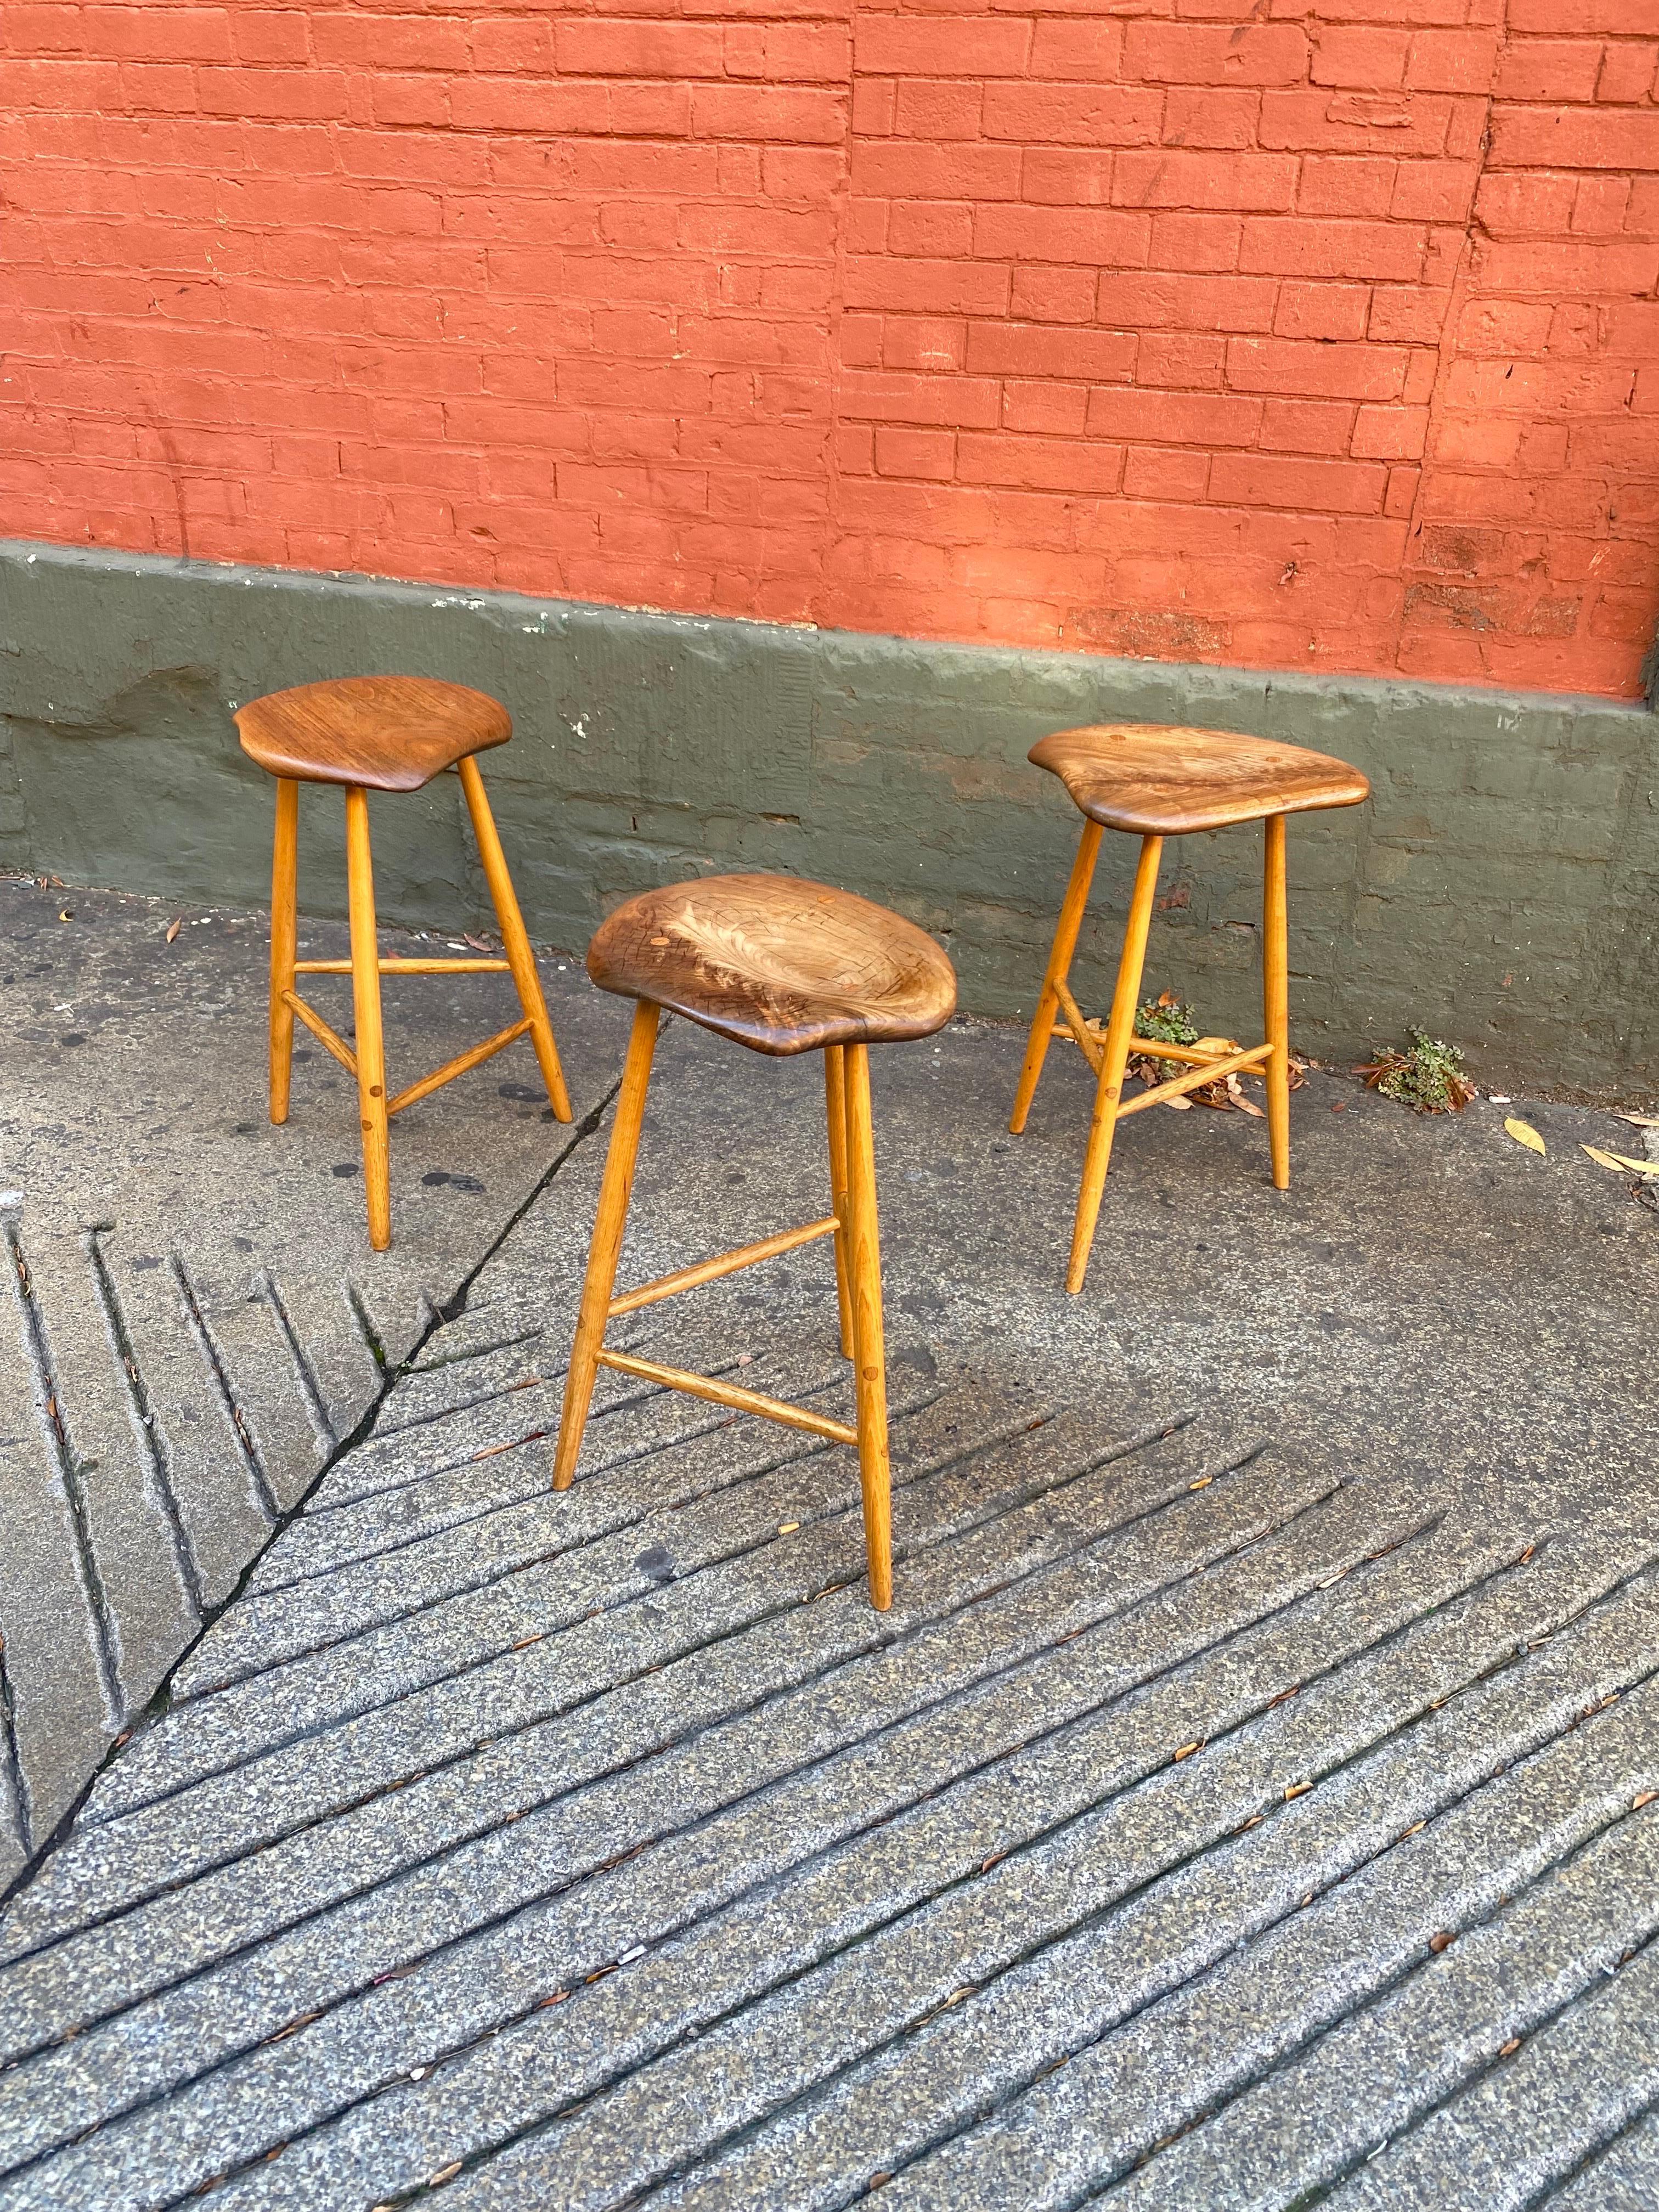 Set of 3 Horace B. Hartshaw Three-legged Stools.  Two date to 1986 and the 3rd was commissioned in 1993.  All signed on bottom.  Hartshaw was a student of Wharton Esherick.  These are beautifully made and completely solid and ready for use!  Show